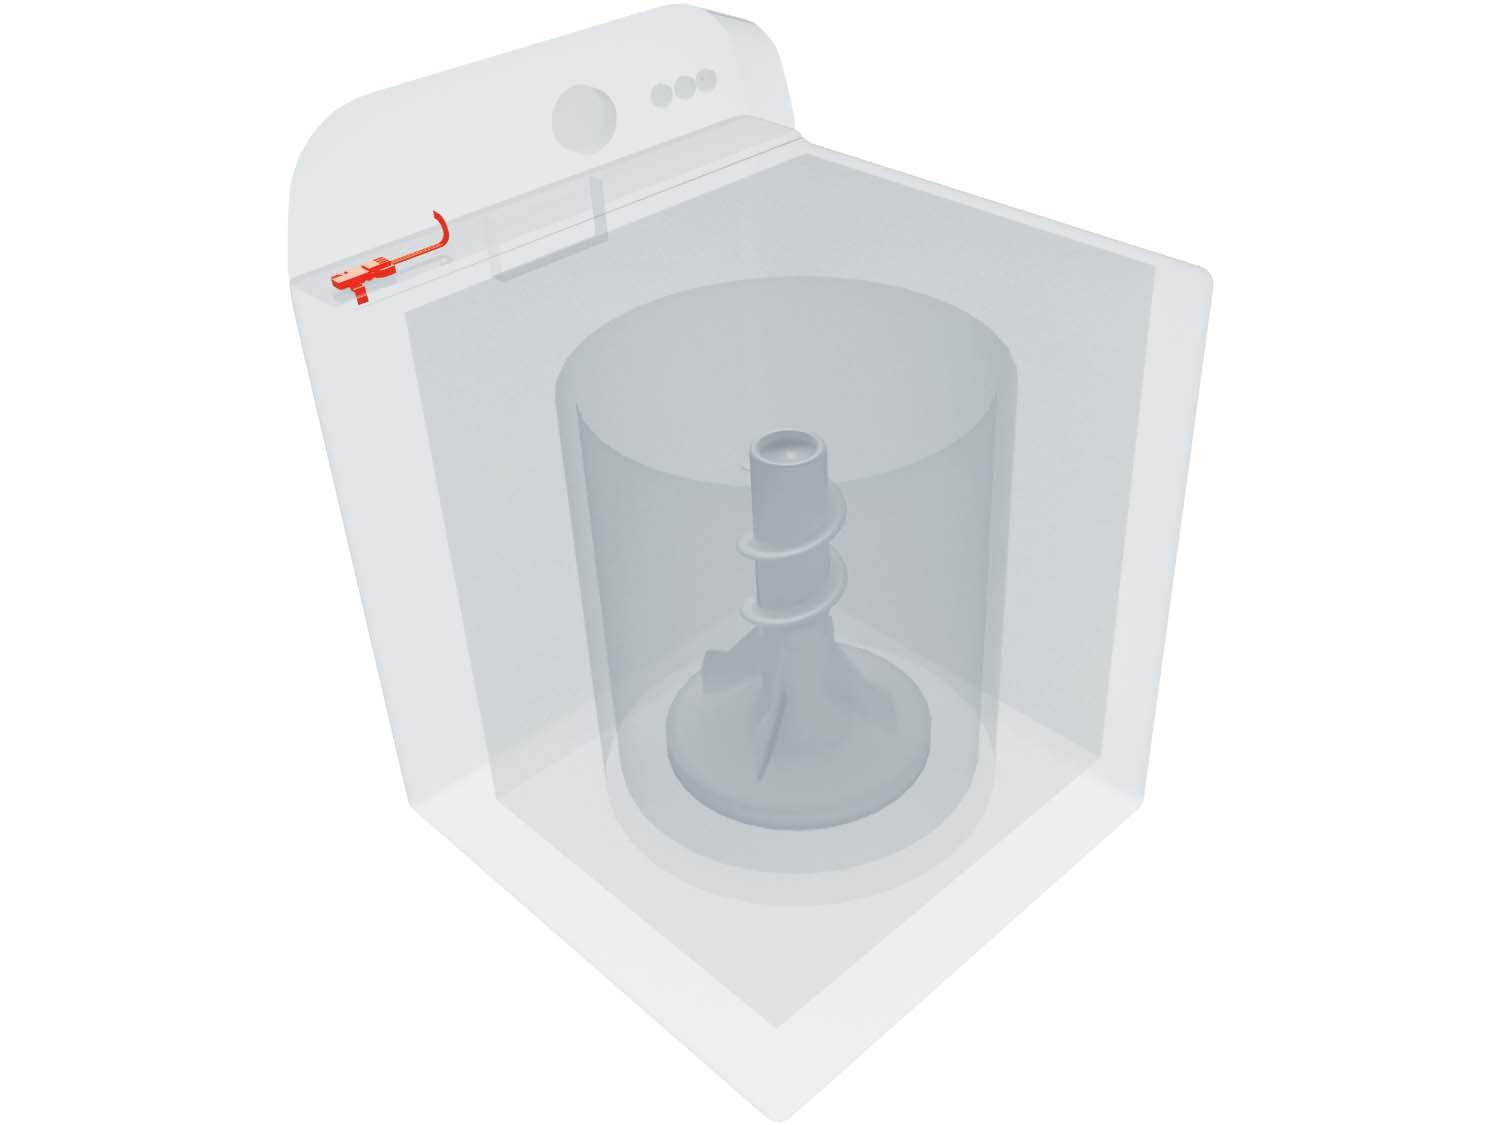 A 3D diagram showing the components of a washer and specifying the location of the lid switch